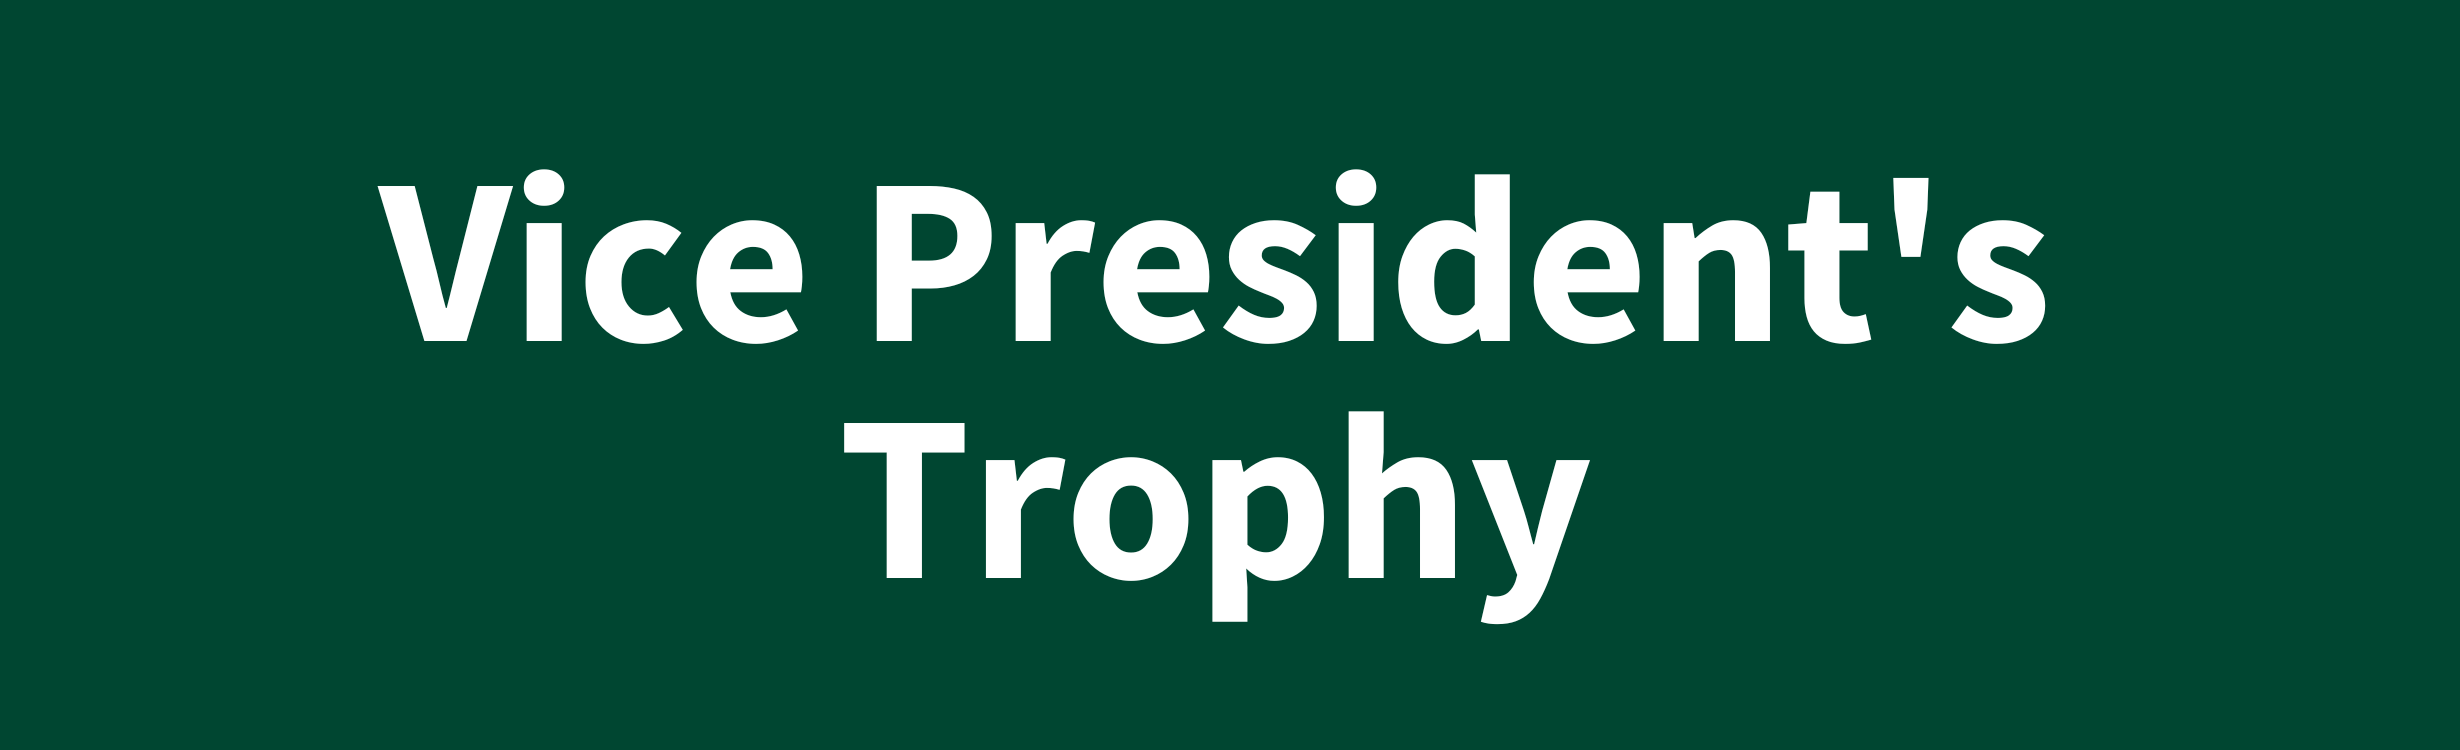 Vice President's Trophy